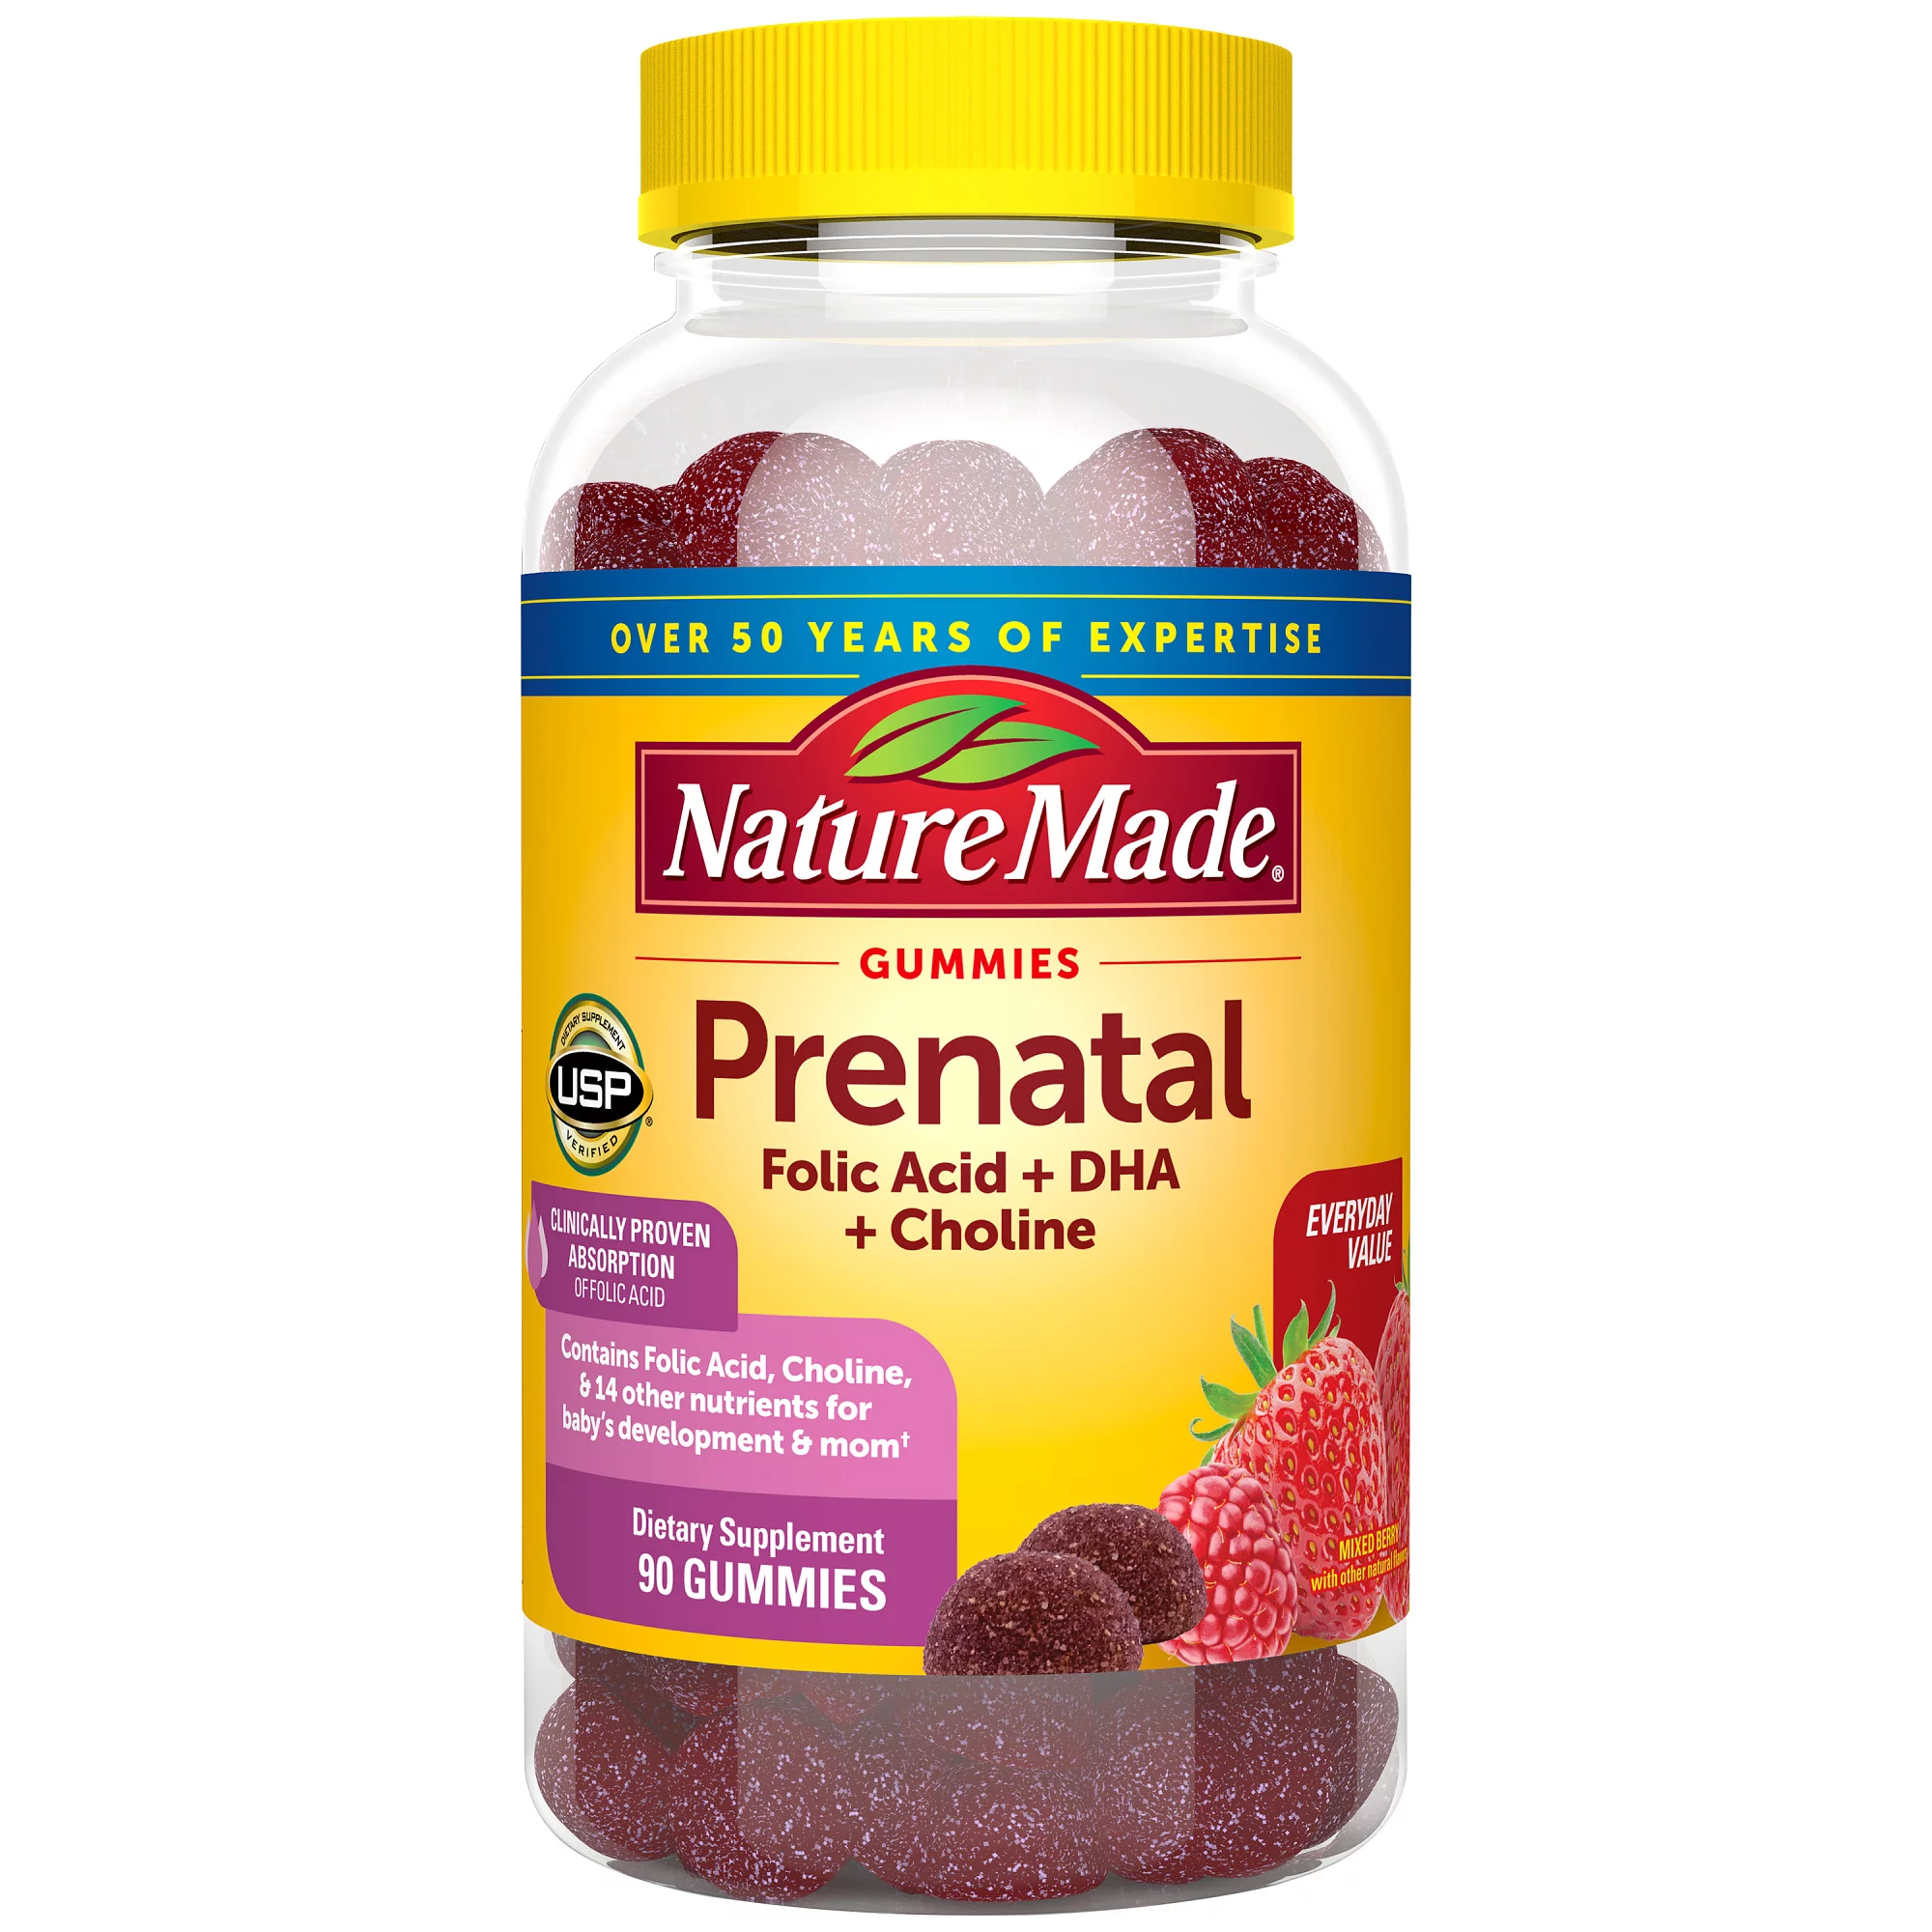 Nature Made Prenatal Gummies with DHA and Folic Acid, Dietary Supplement, 90 Count